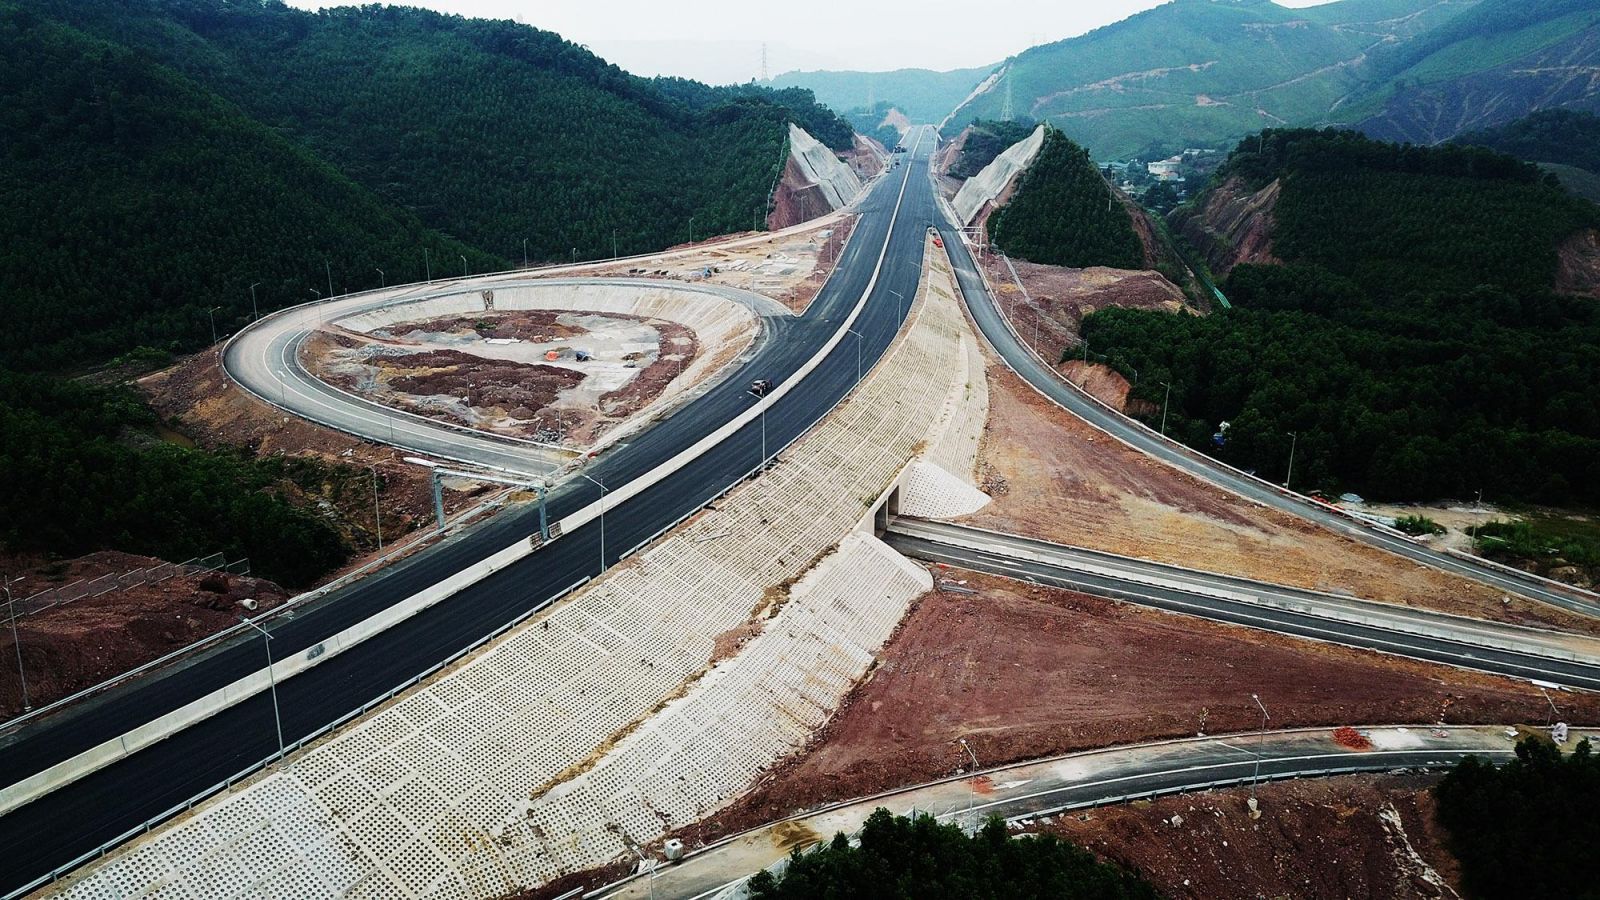 The Ha Long - Van Don expressway is now under construction. It will connect with Van Don- Mong Cai expressway to become Vietnam's longest one. (Photo: baoquangninh.com.vn)